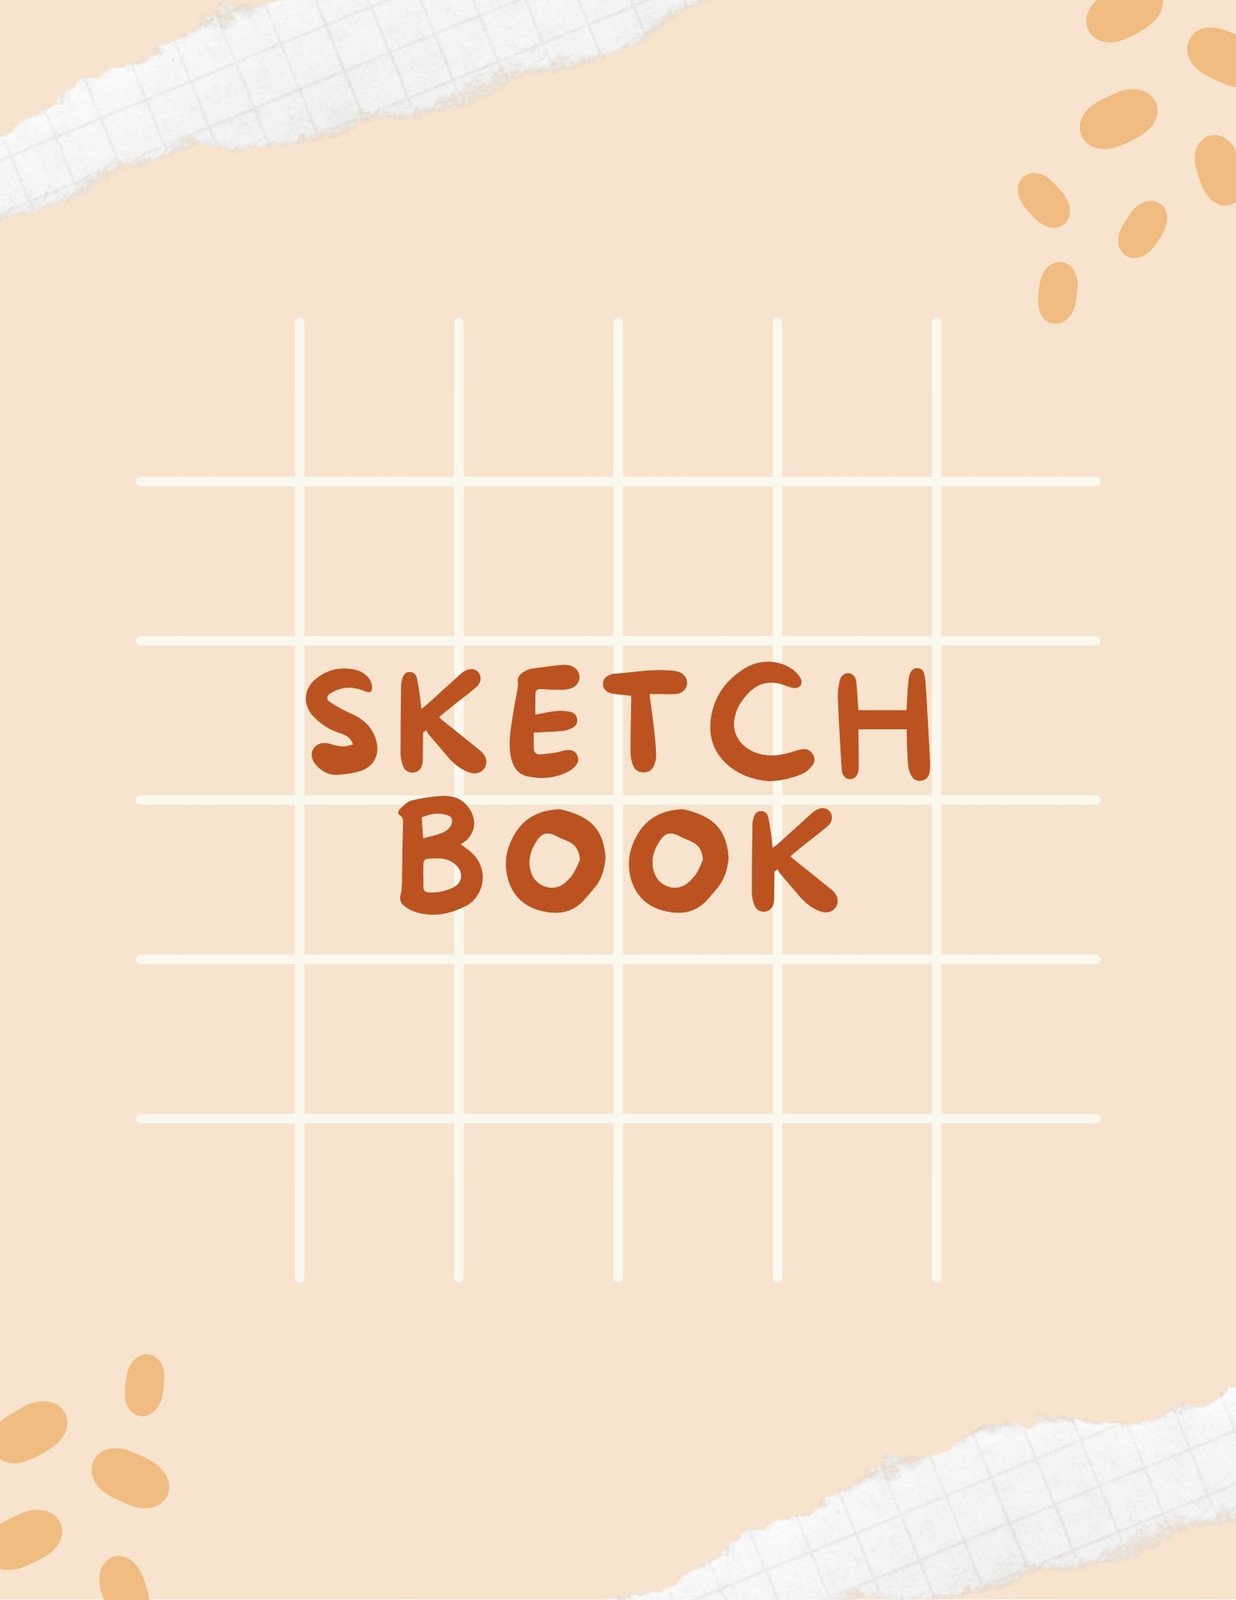 https://marketplace.canva.com/EAE-sduLE3g/1/0/1236w/canva-minimal-lined-ripped-paper-sketchbook-7QdhTprcp_4.jpg